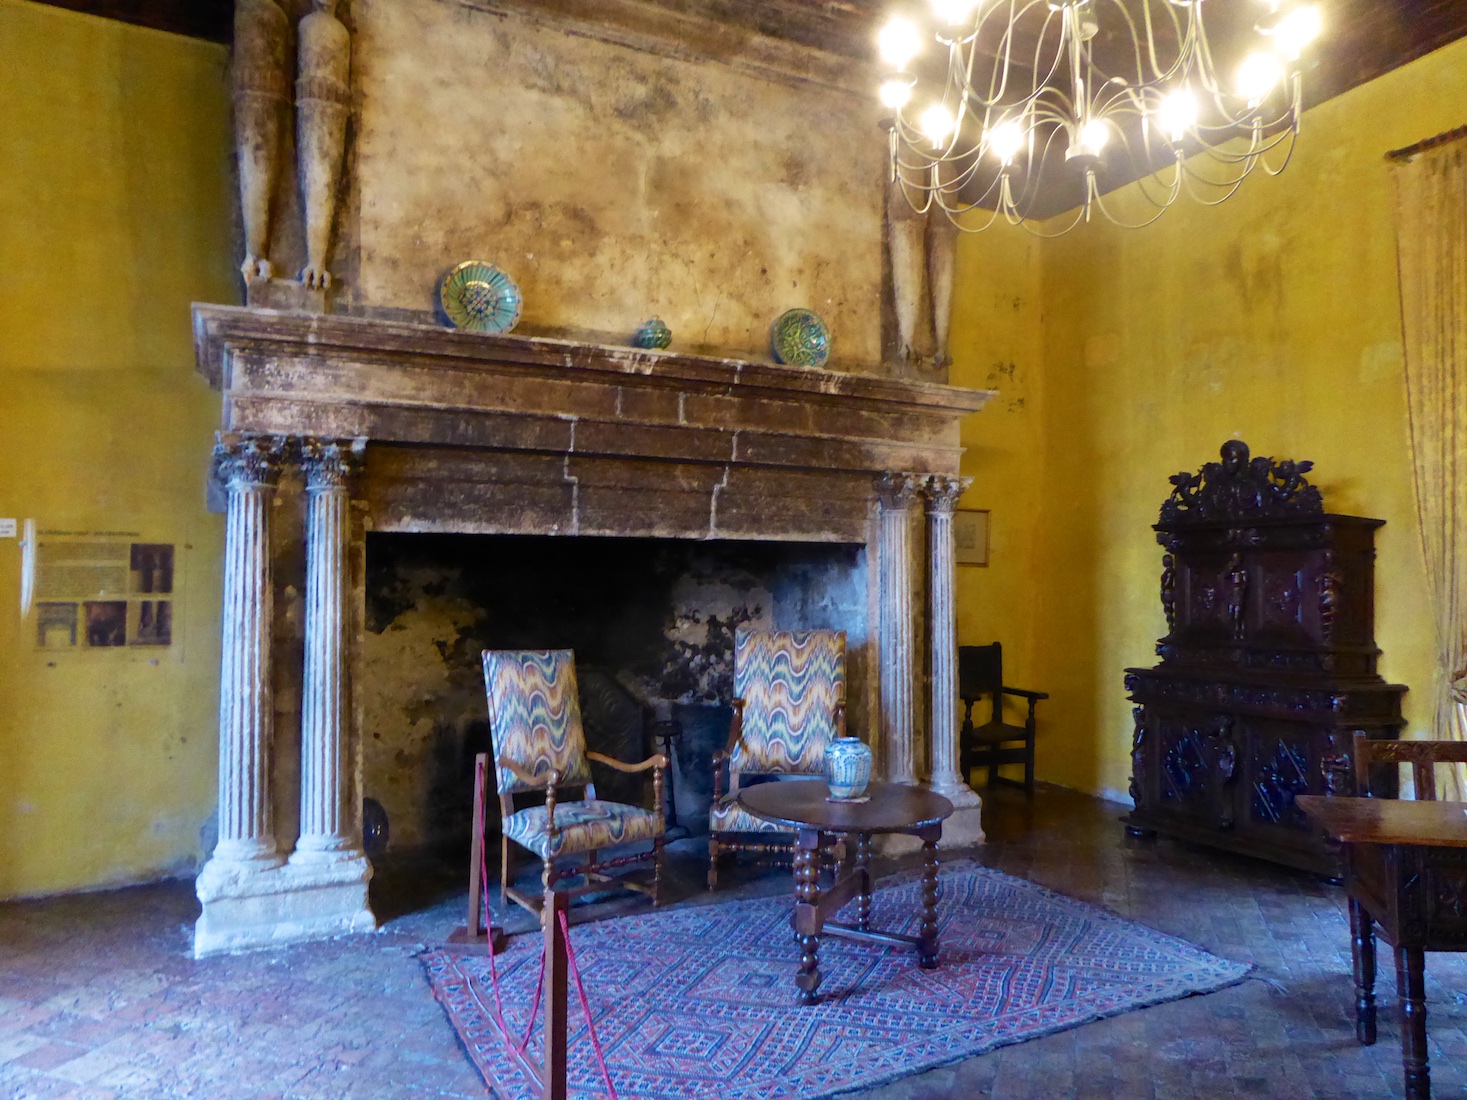 Fireplace in Reception room of the Lourmarin chateau, Loumrarin, Luberon, Vaucluse, Provence, France